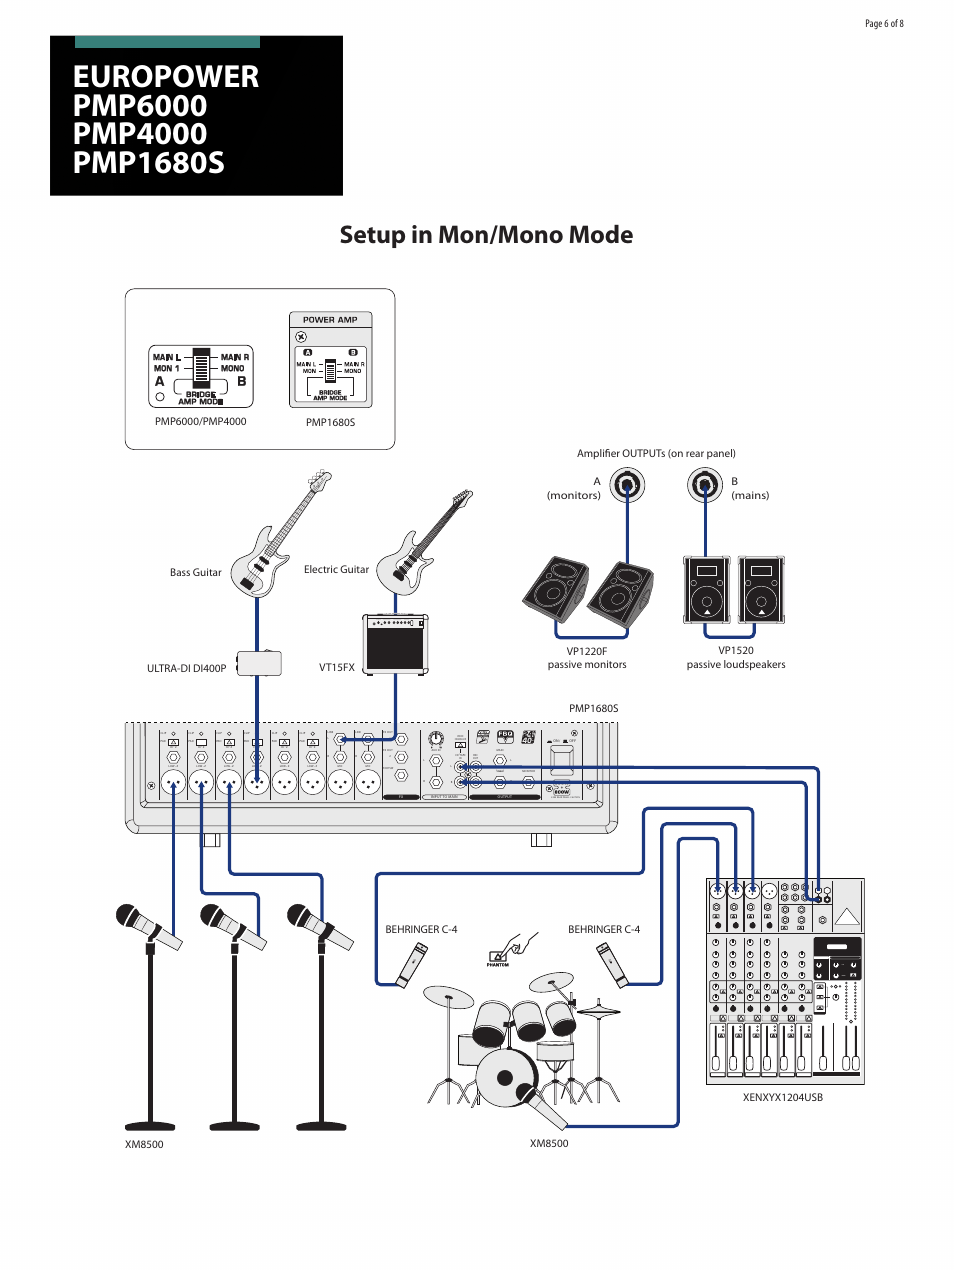 Setup in mon/mono mode, Page 6 of 8 | Behringer EUROPOWER PMP6000 User  Manual | Page 6 / 8